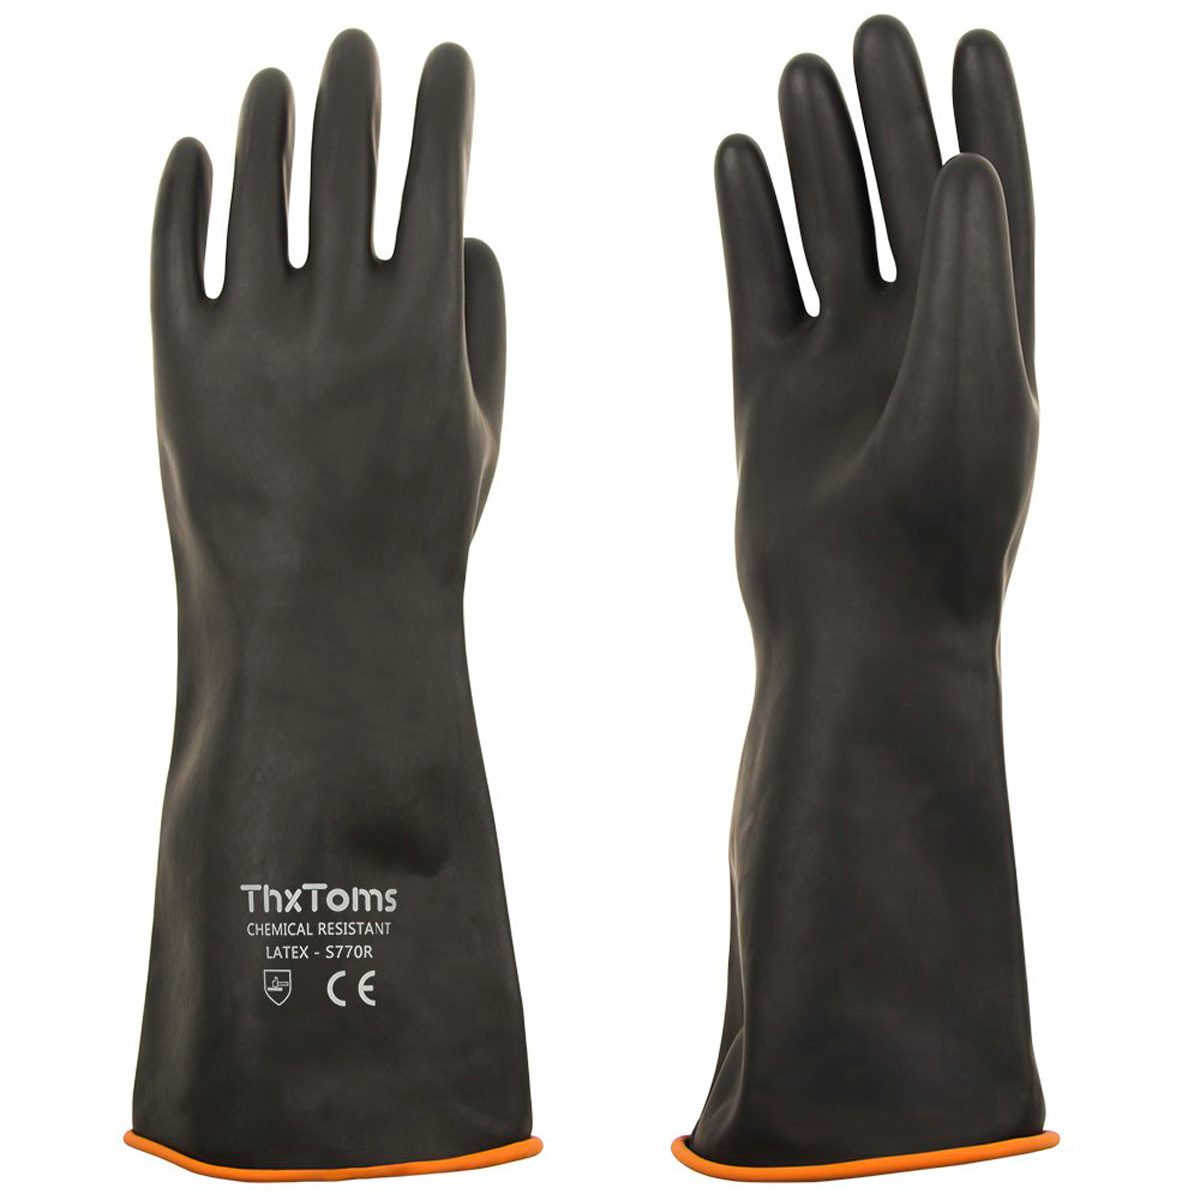 Heavy Duty Rubber Gloves Cleaning Waterproof Black Protection Large Gardening 